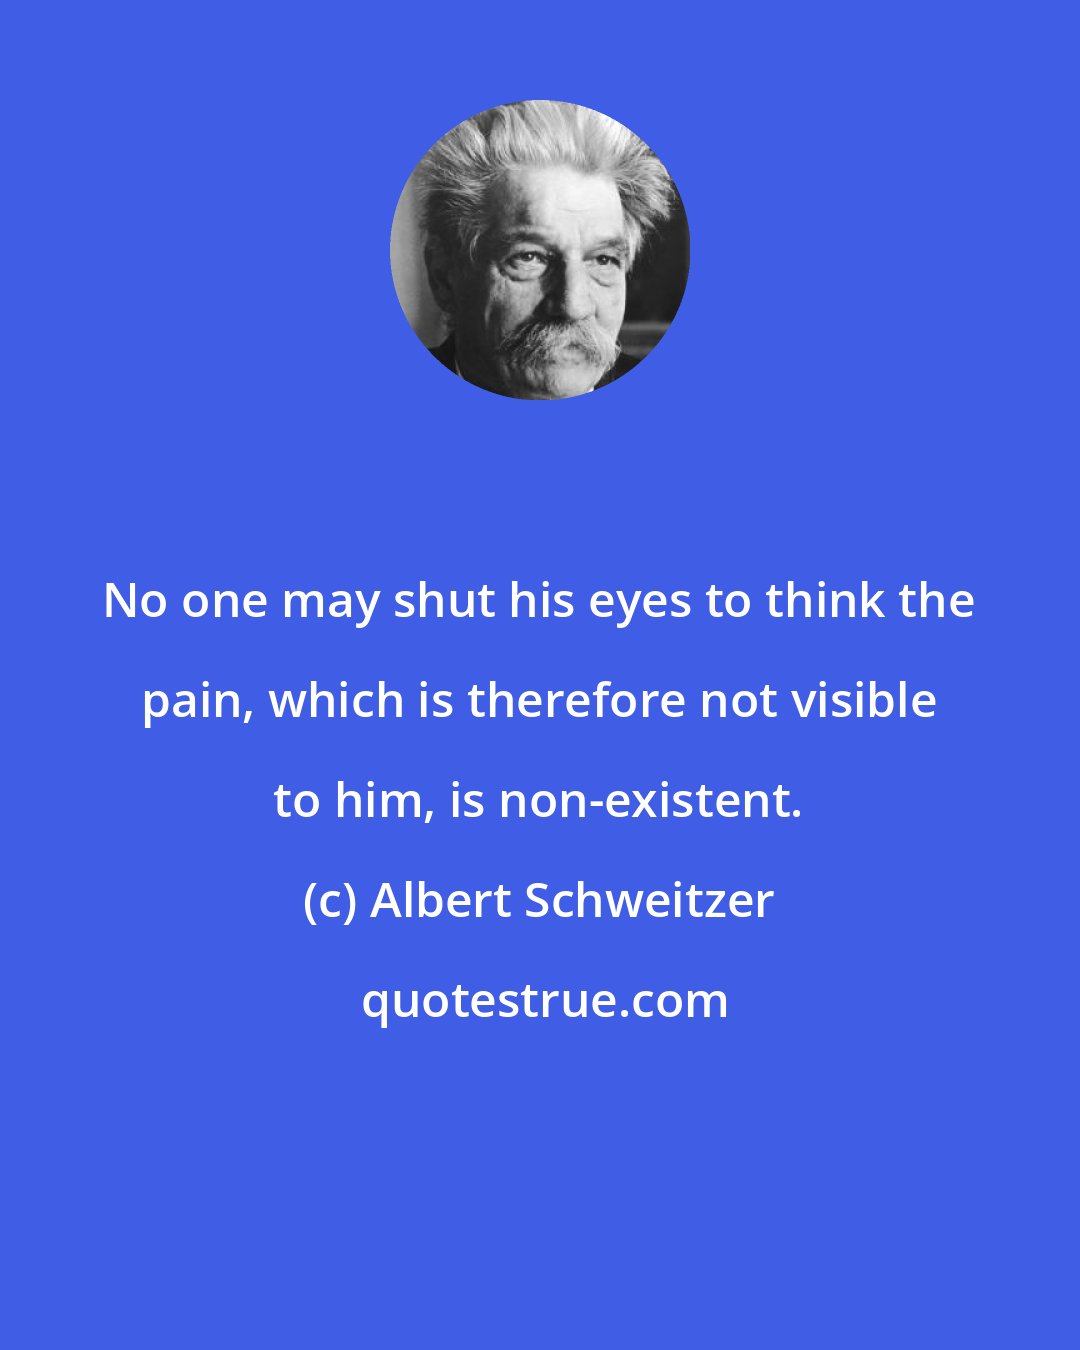 Albert Schweitzer: No one may shut his eyes to think the pain, which is therefore not visible to him, is non-existent.